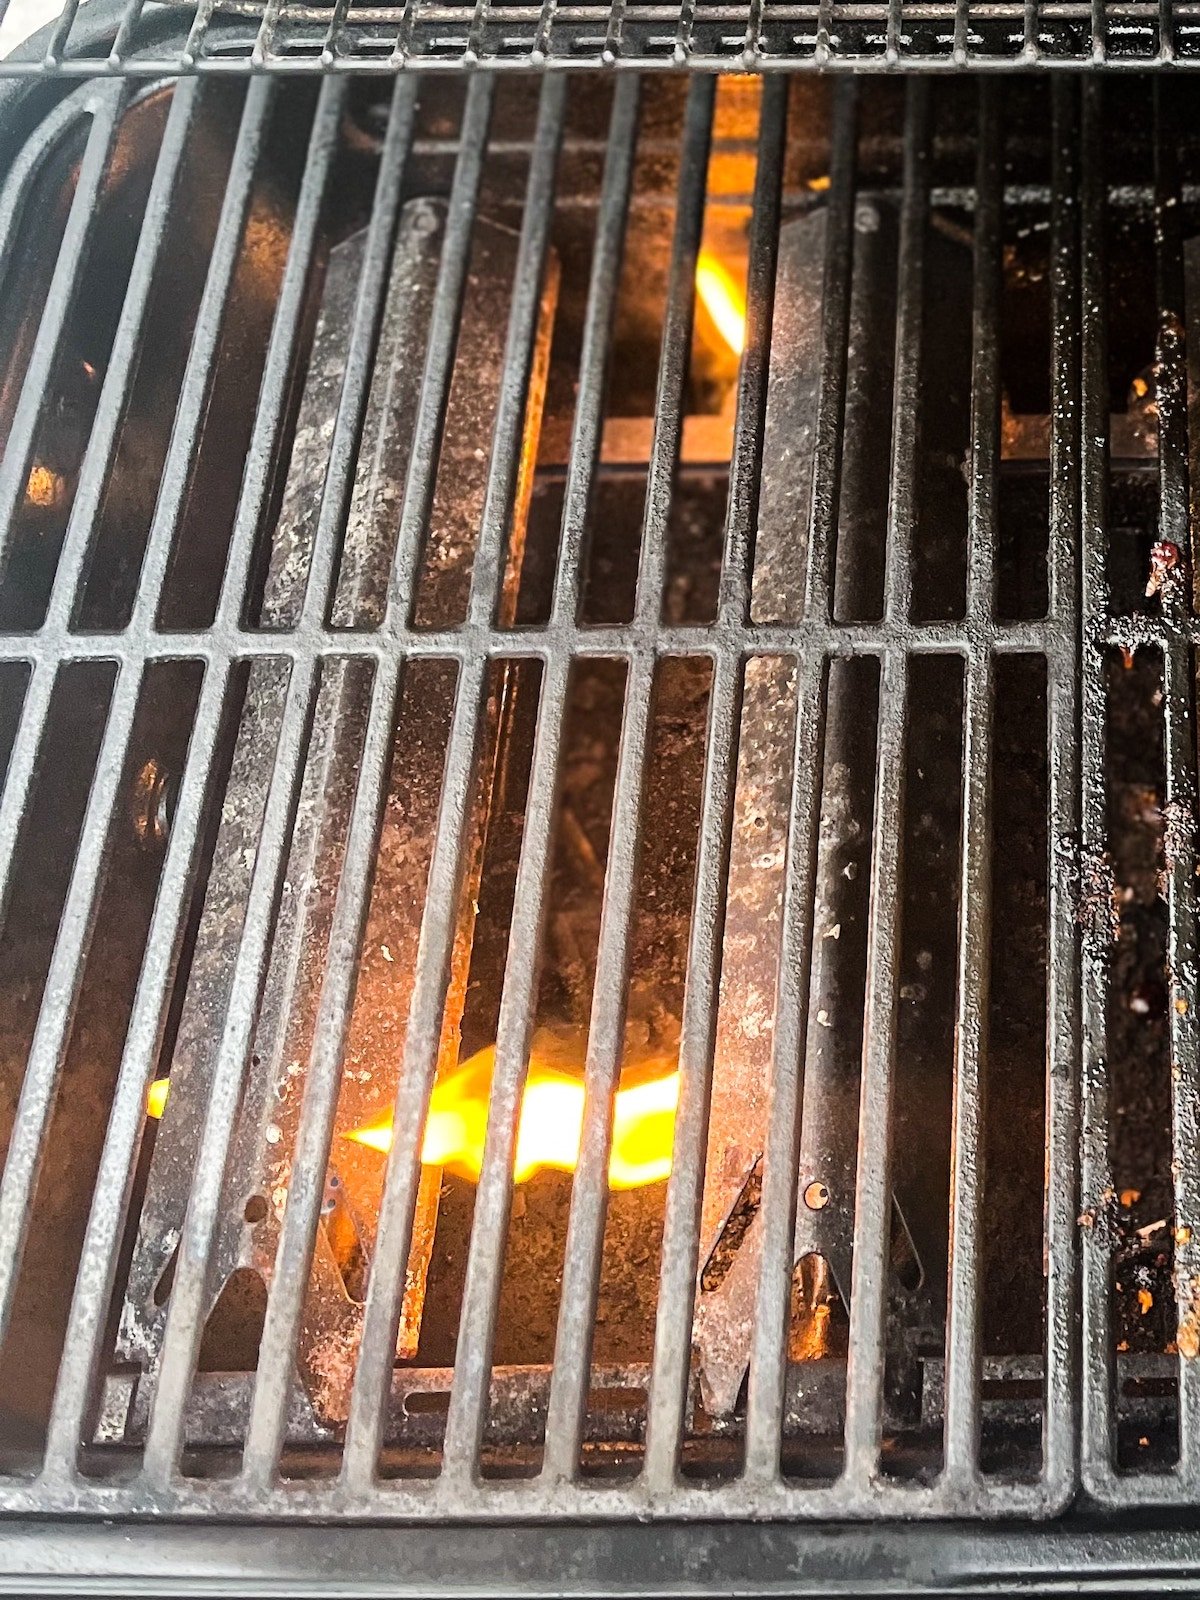 The side of the grill with the burners on.